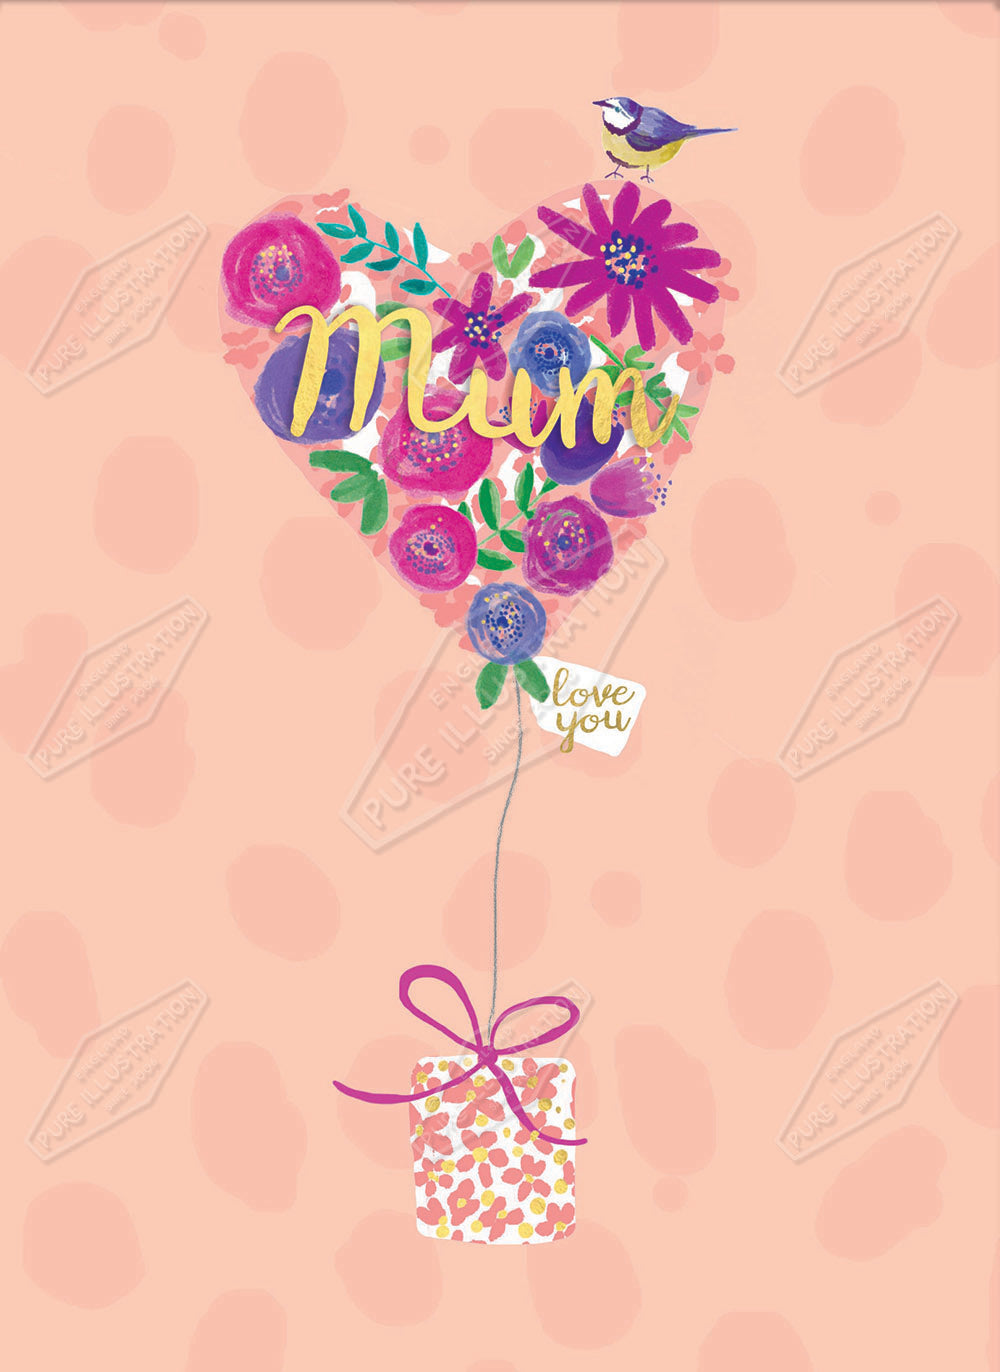 00033904SLA- Sarah Lake is represented by Pure Art Licensing Agency - Mother's Day Greeting Card Design